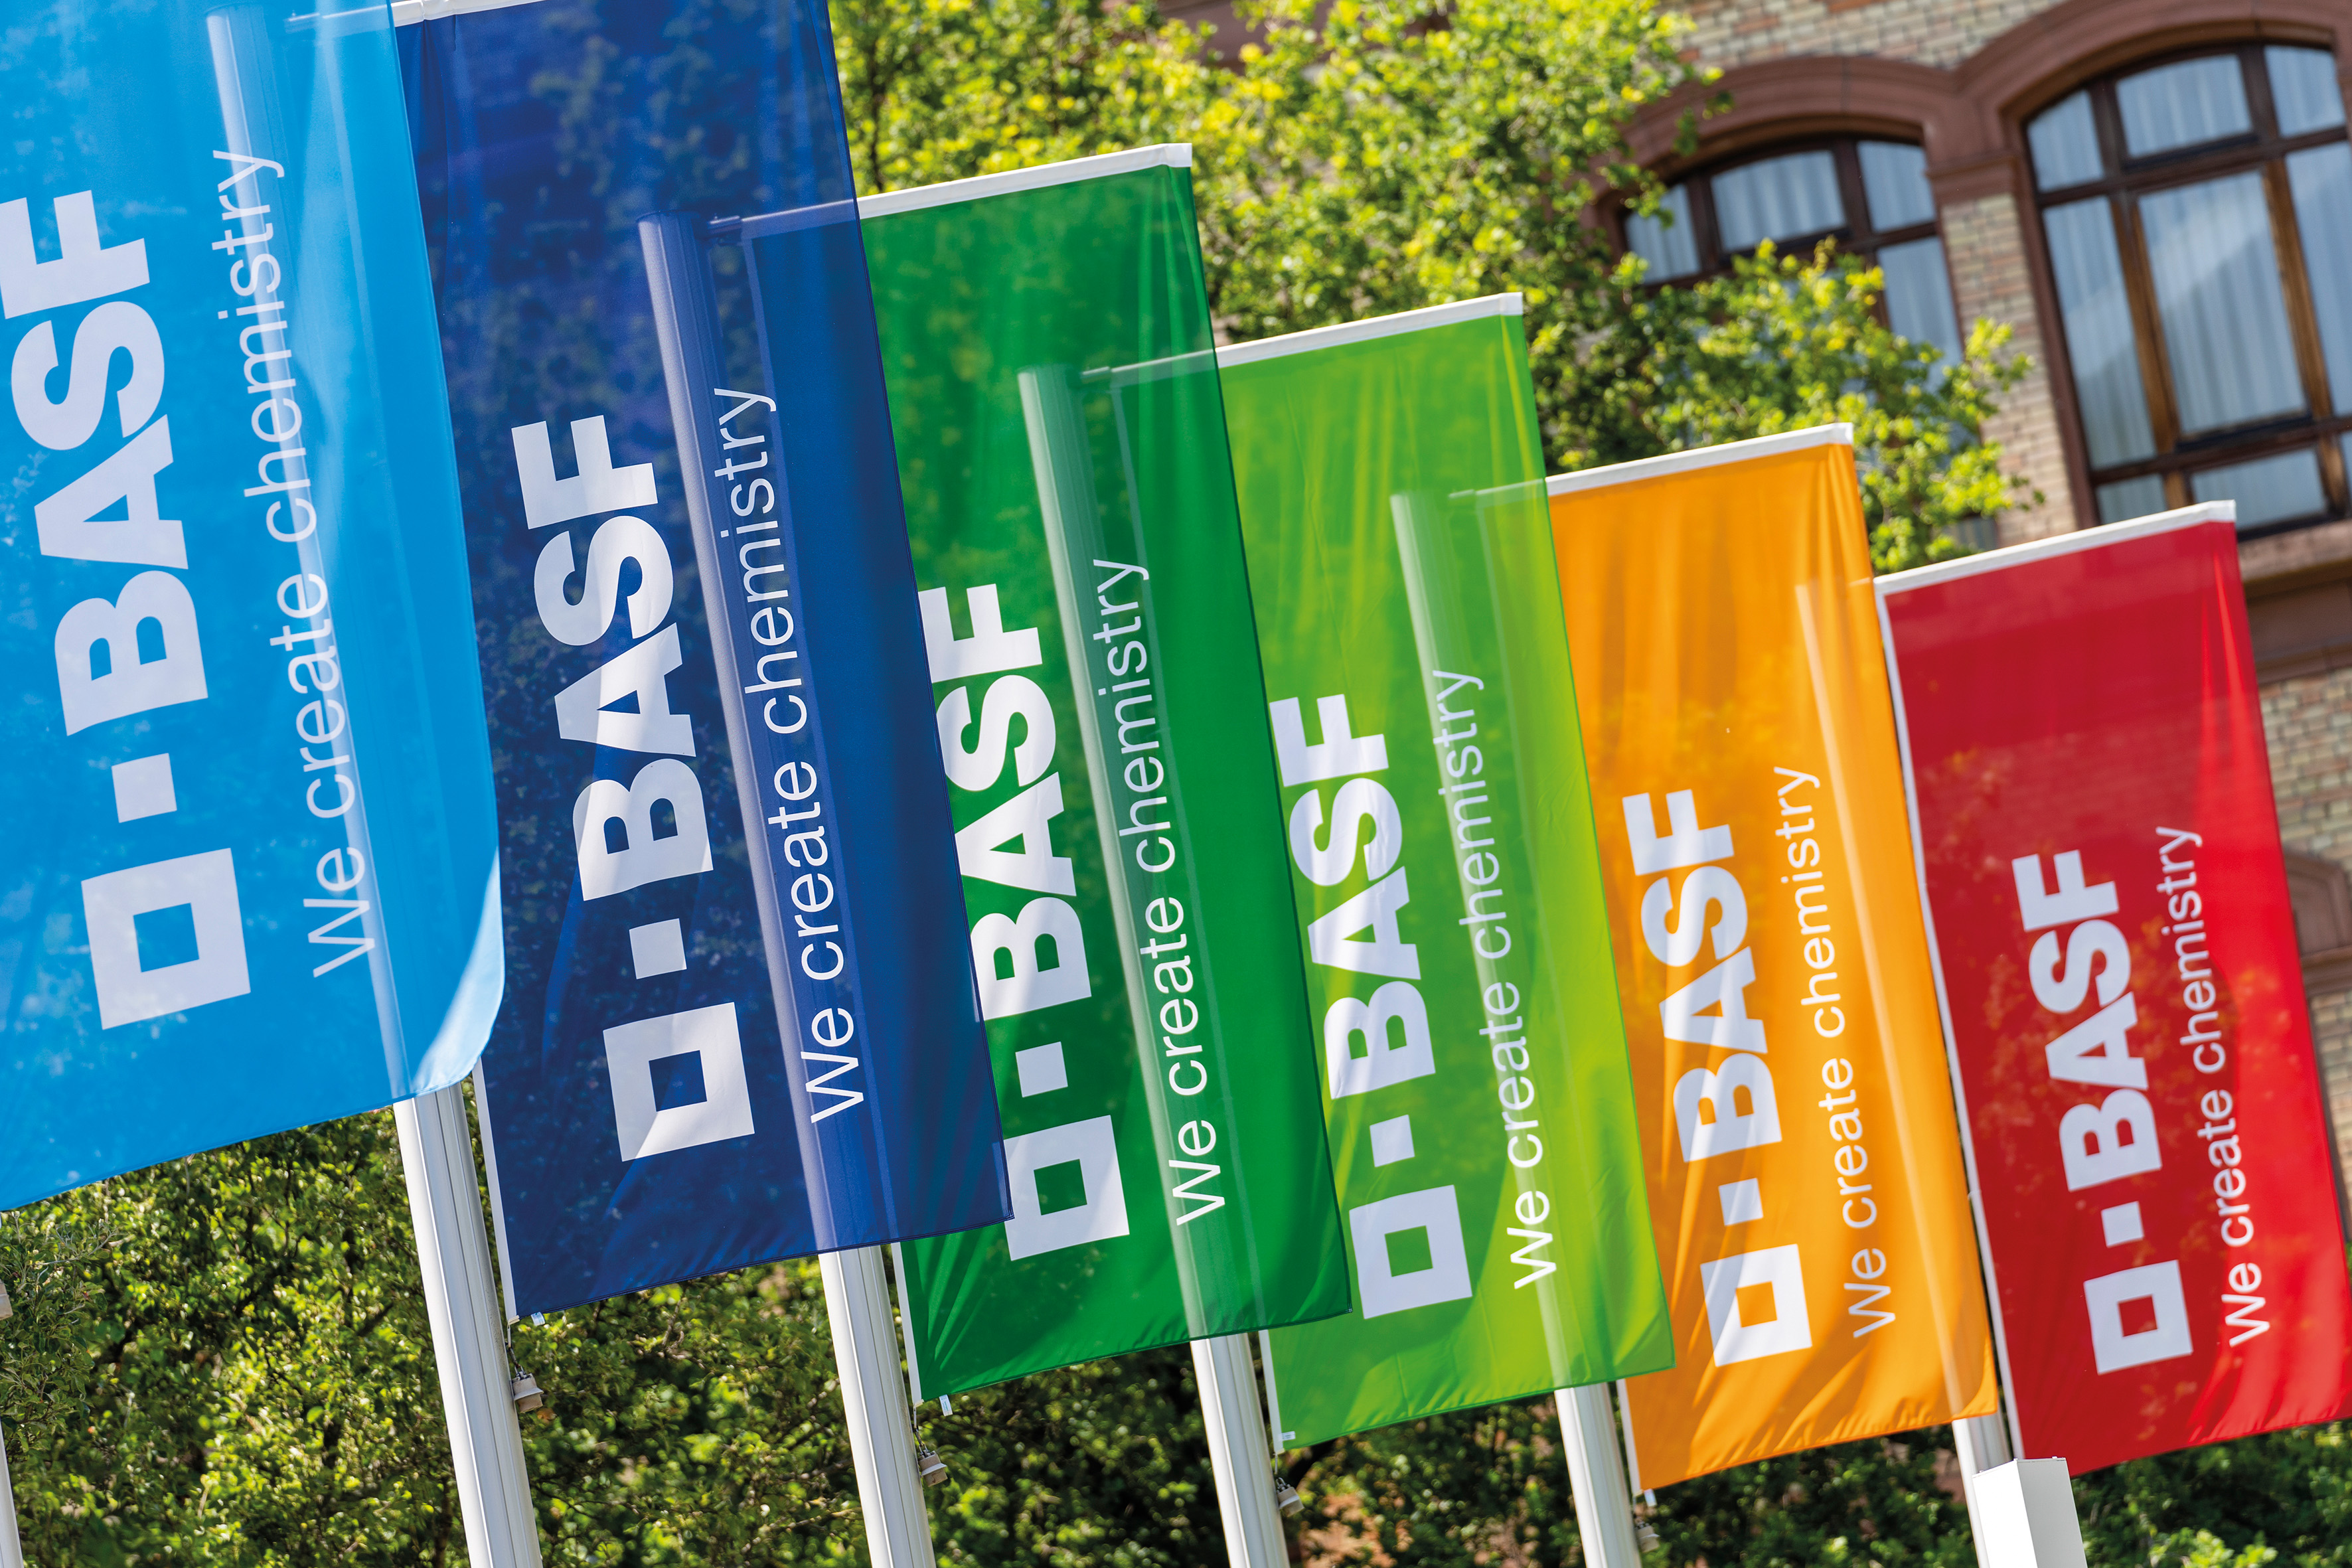 BASF-Fahnen am Standort Ludwigshafen / BASF flags at the Ludwigshafen site